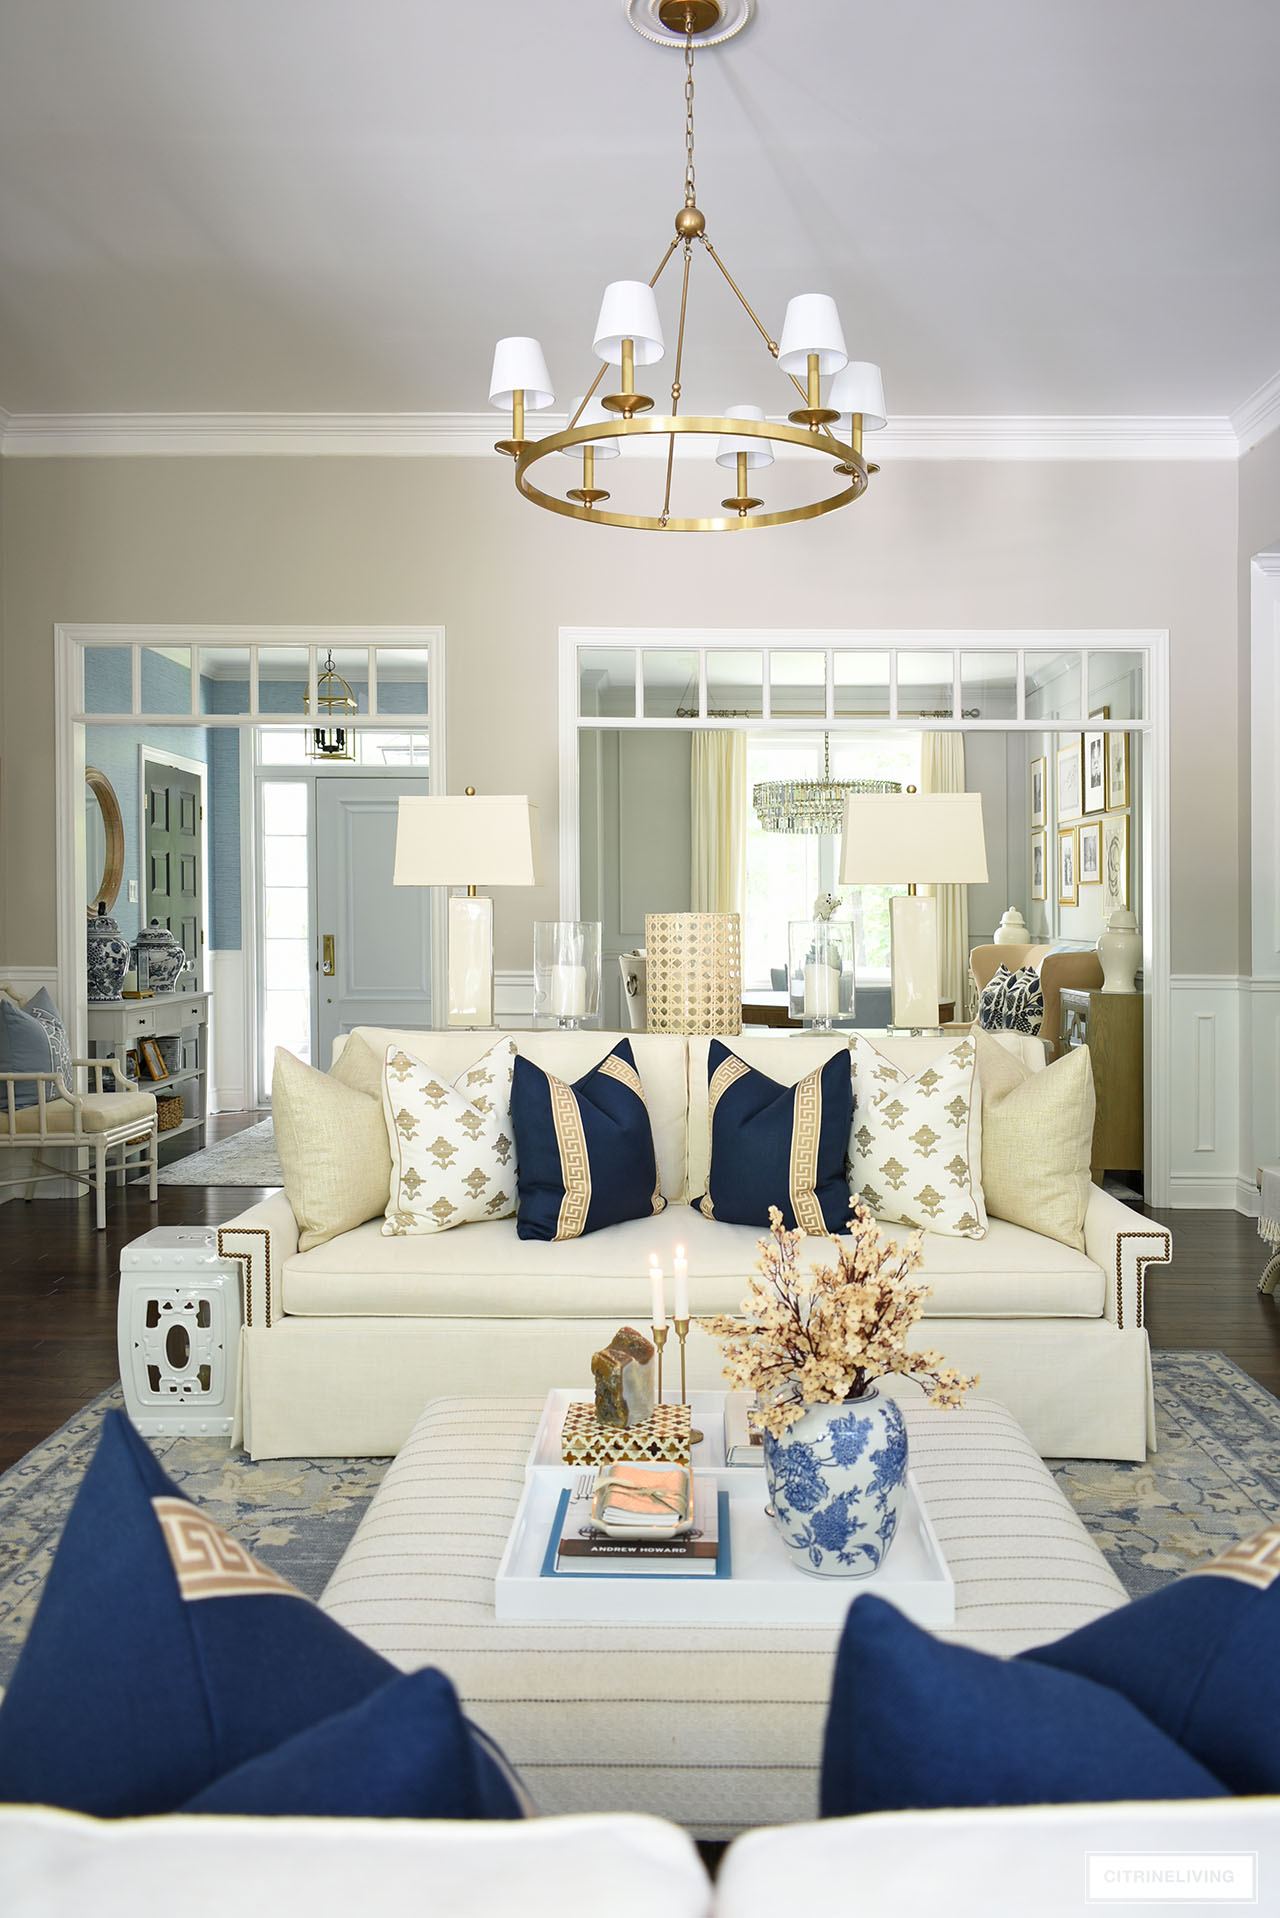 Fall living room decor with navy, tan and white pillows bring an elegant feel to this space.